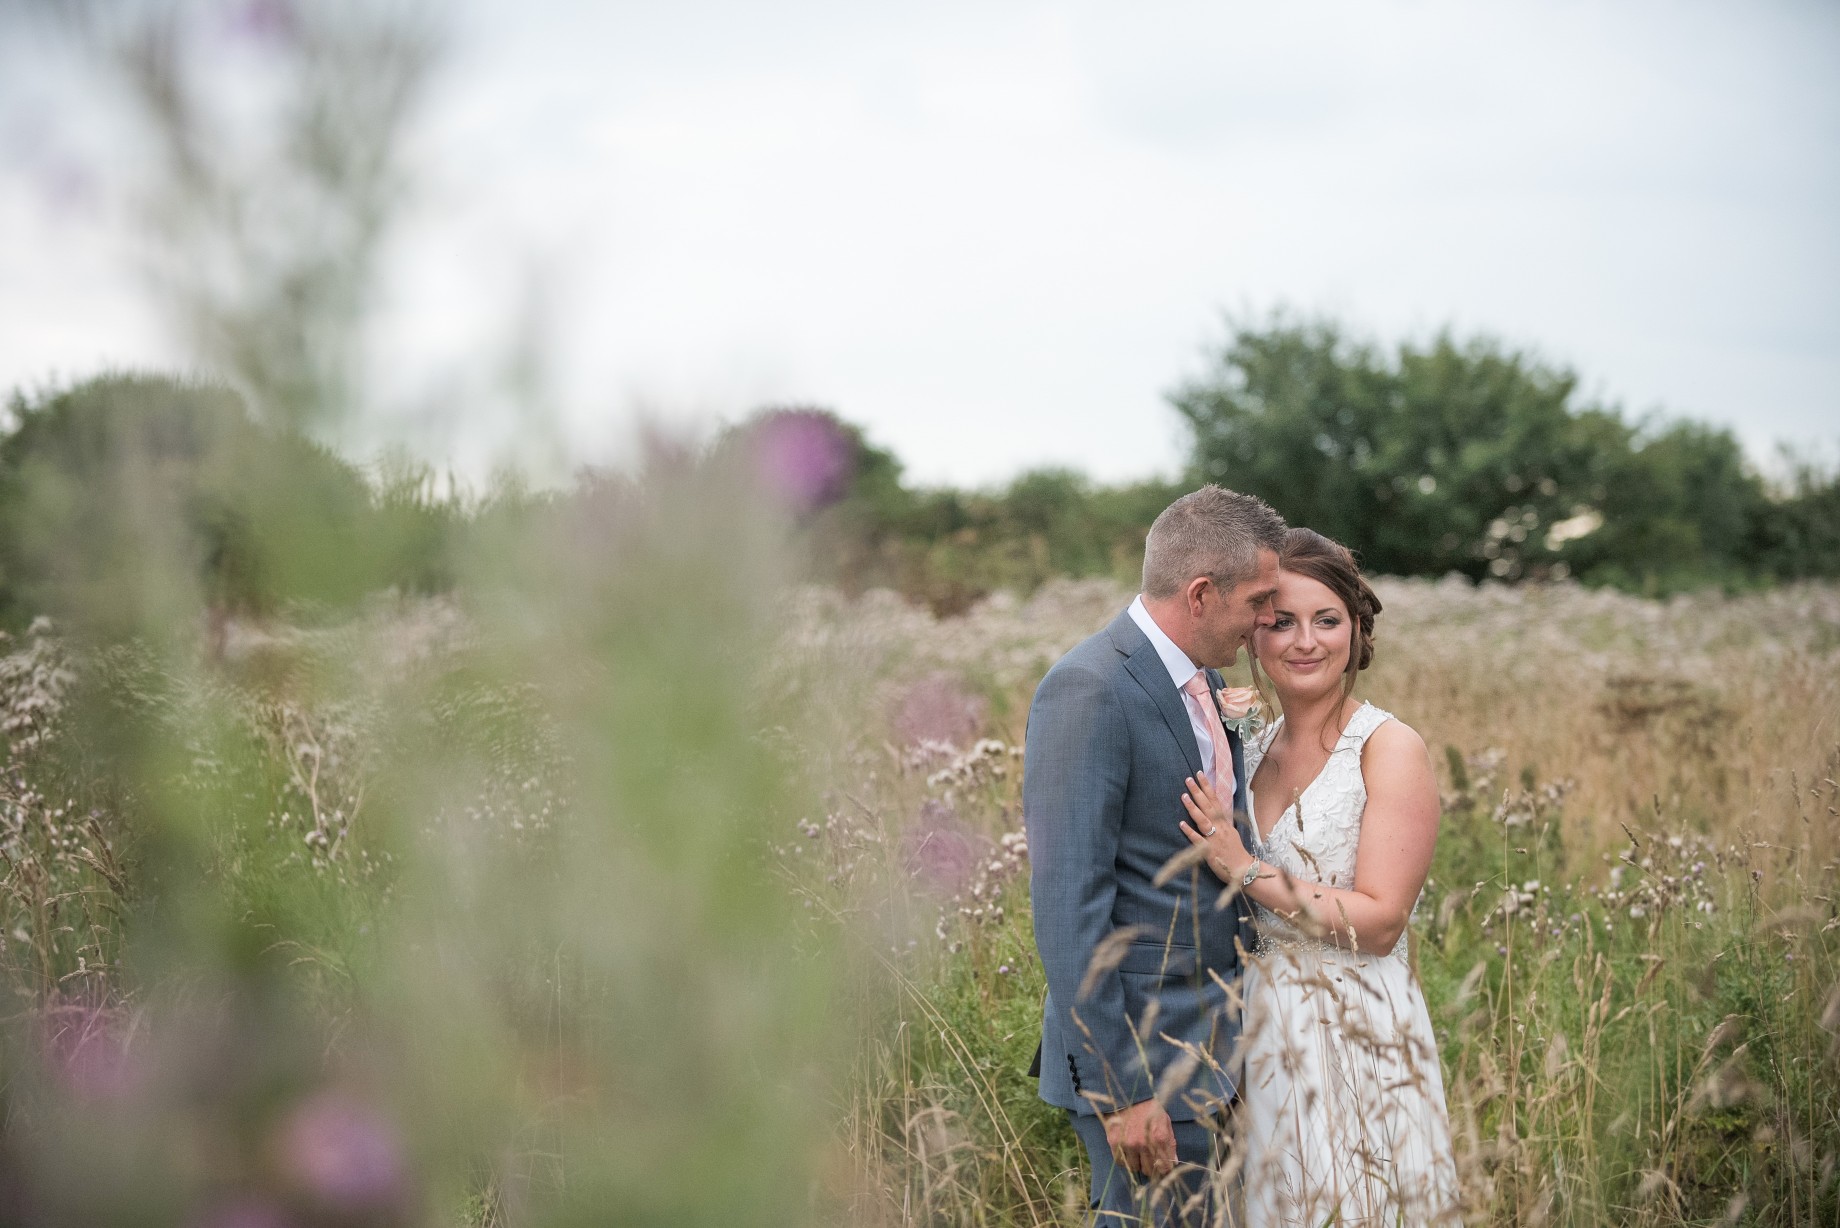 Wedding photography at Red Barn in Capel - the bride and groom